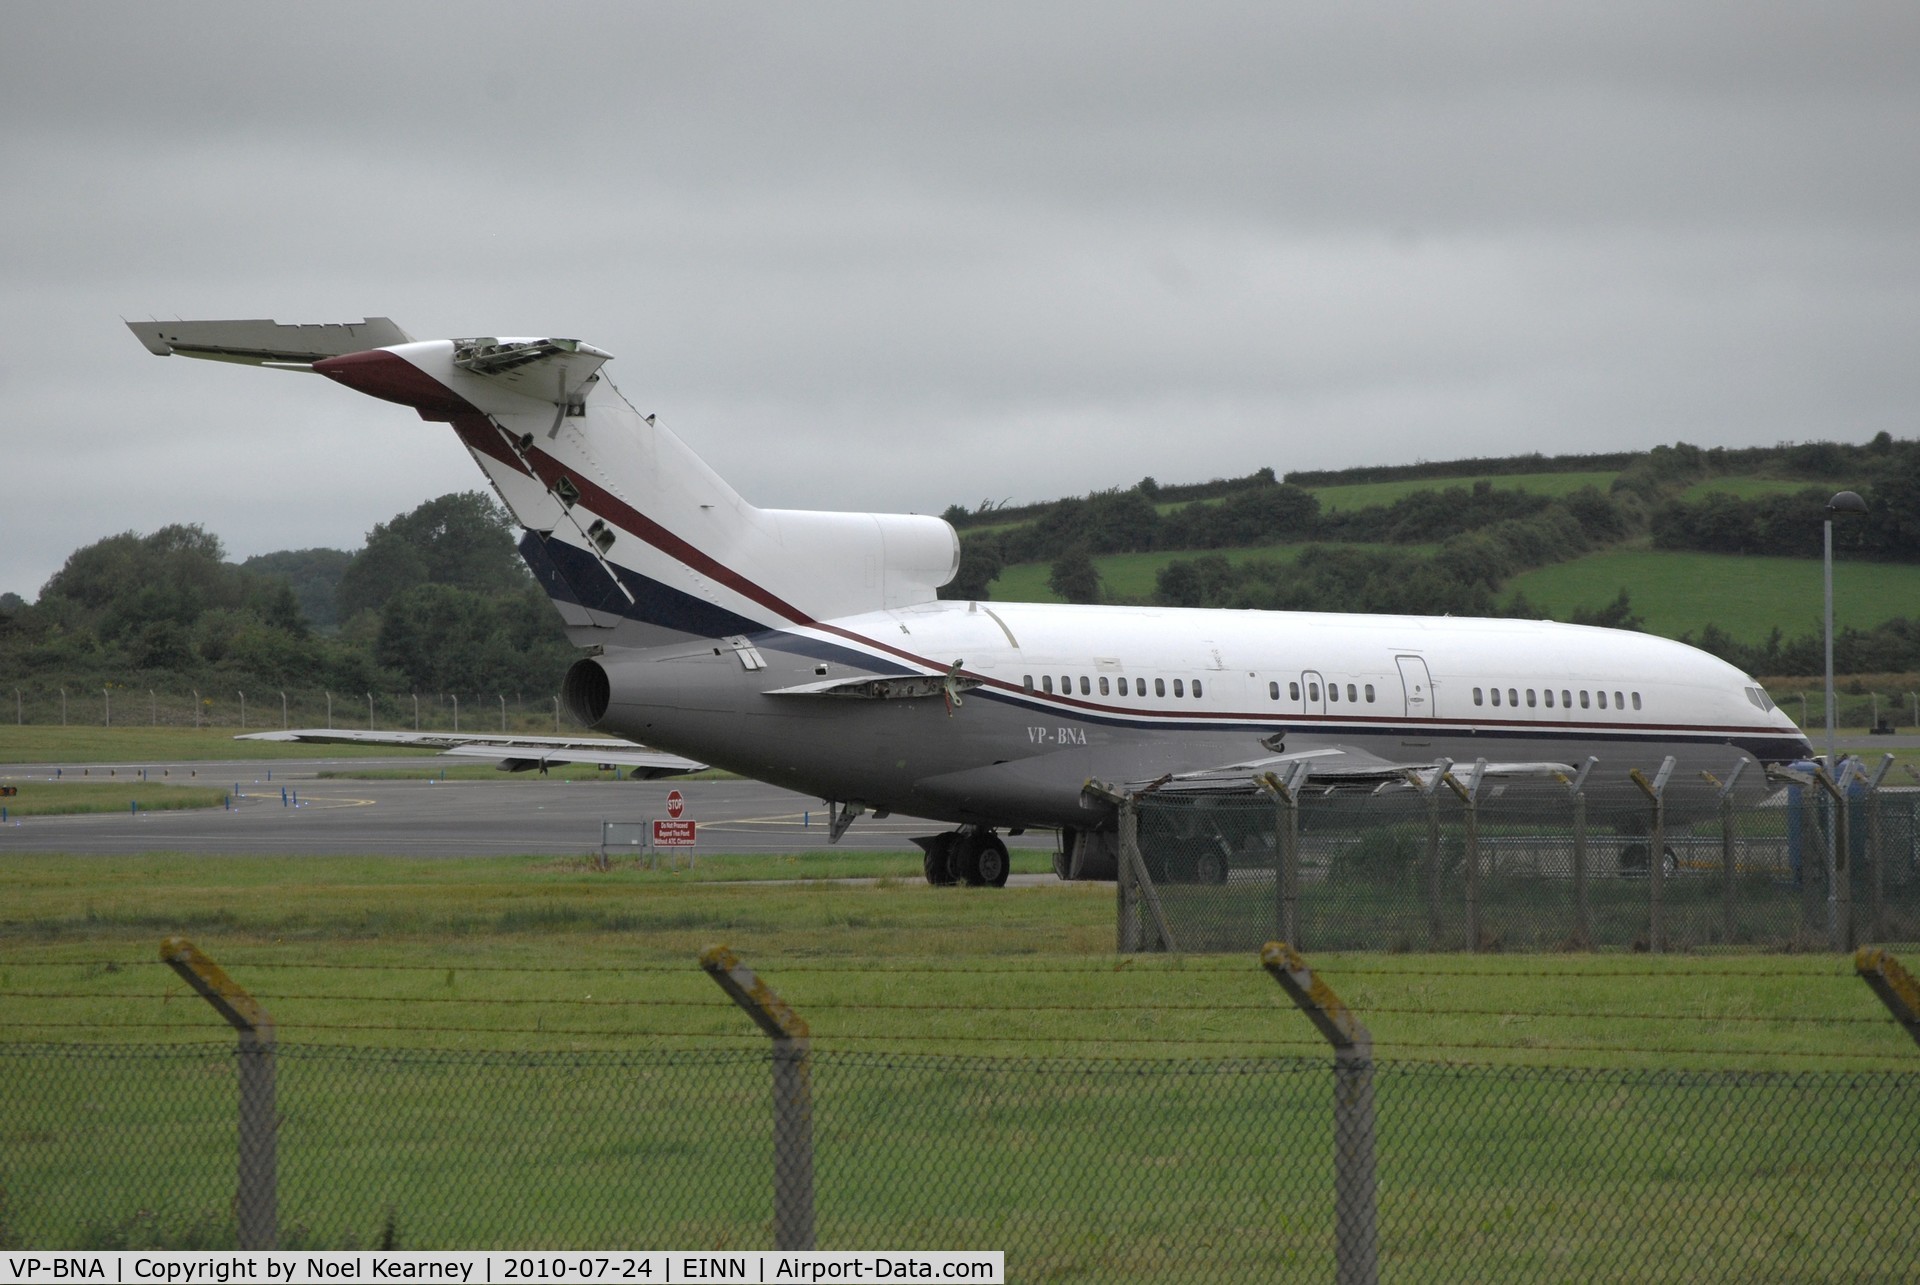 VP-BNA, 1967 Boeing 727-21 C/N 19262, A long time resident of Shannon VP-BNA has been moved to the 'Air Atlanta' ramp.